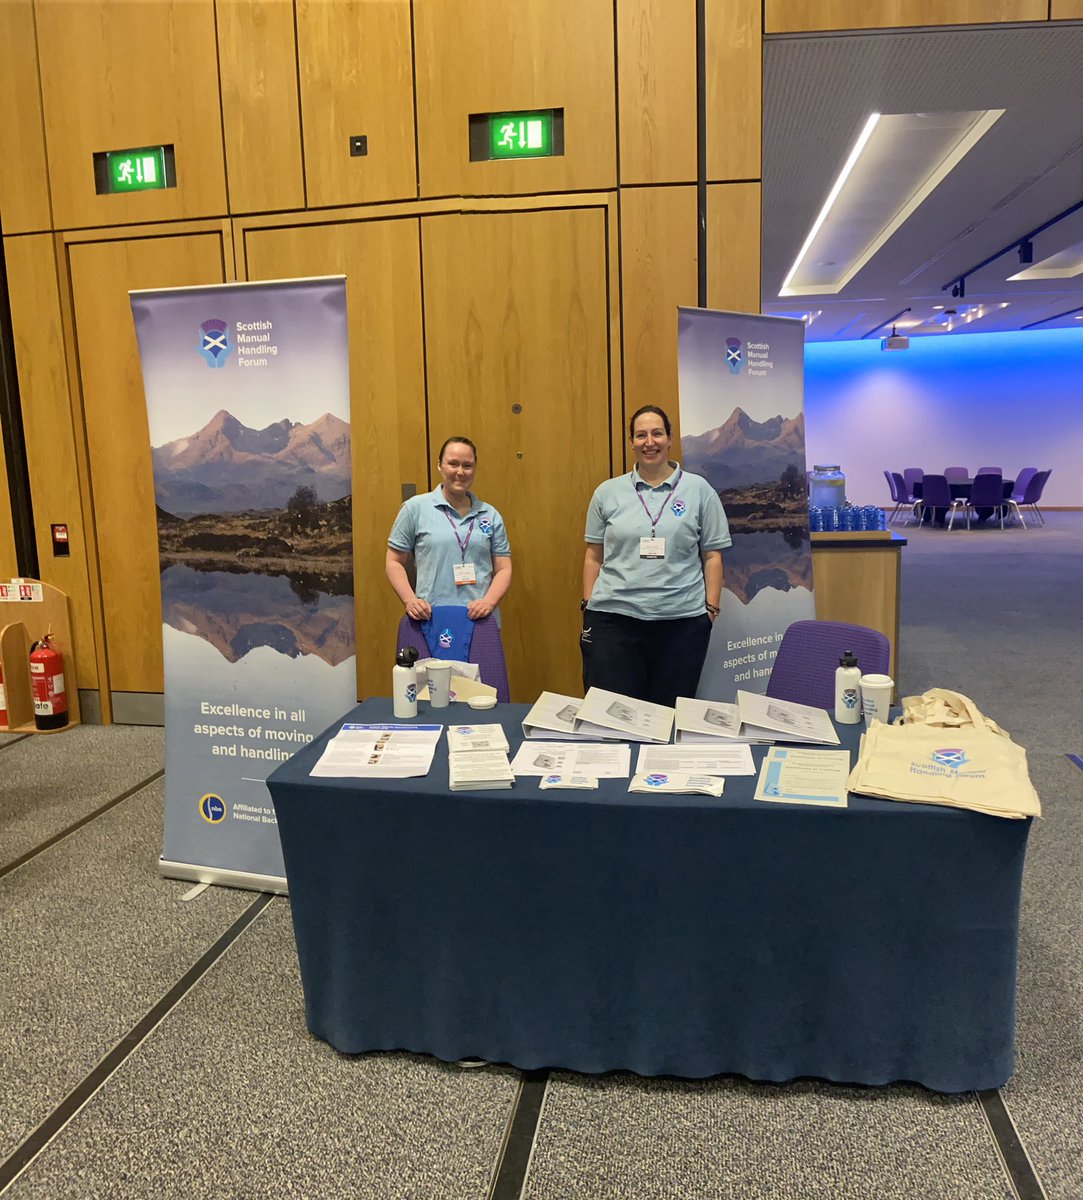 Find us today @CIPD Scotland. Promoting Scottish Manual Handling to HR professionals #CIPDScotConf23 #saferpersonhandling #betterworkinglives #smhf #cpd #peopleareourbestassets